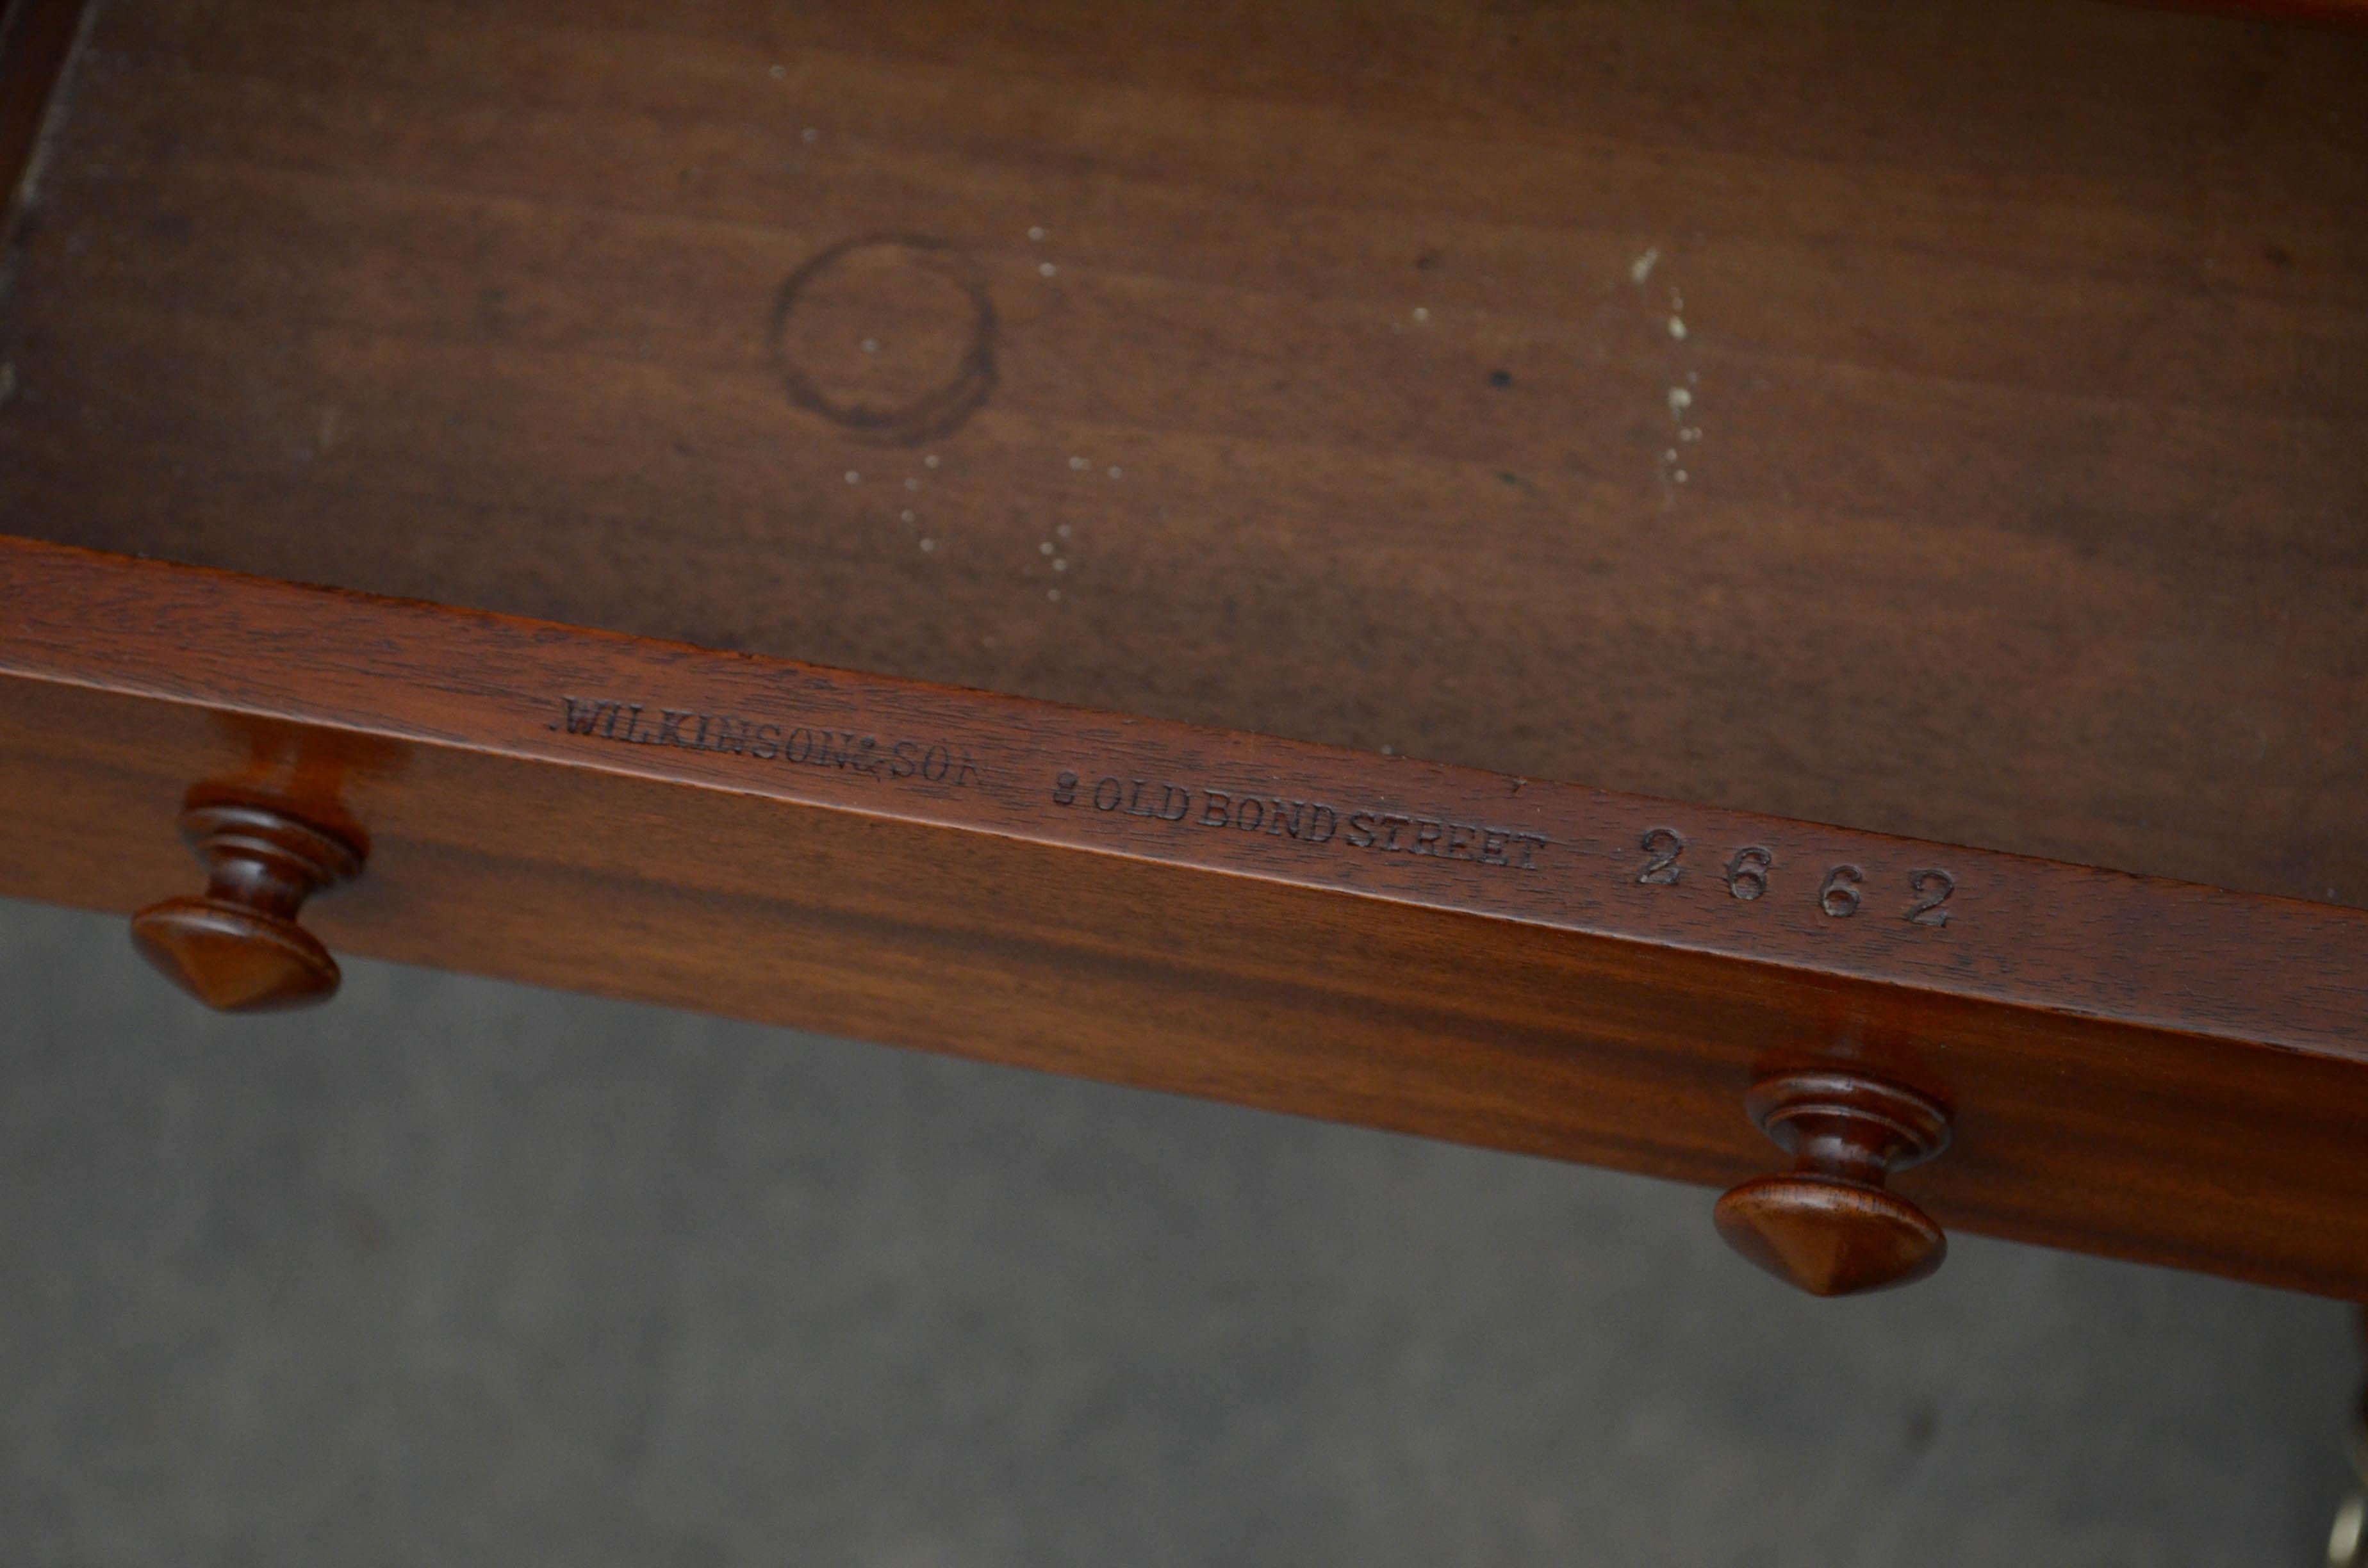 Victorian Mahogany Writing Table by Wilkinson & Son, 8 Old Bond Street 1